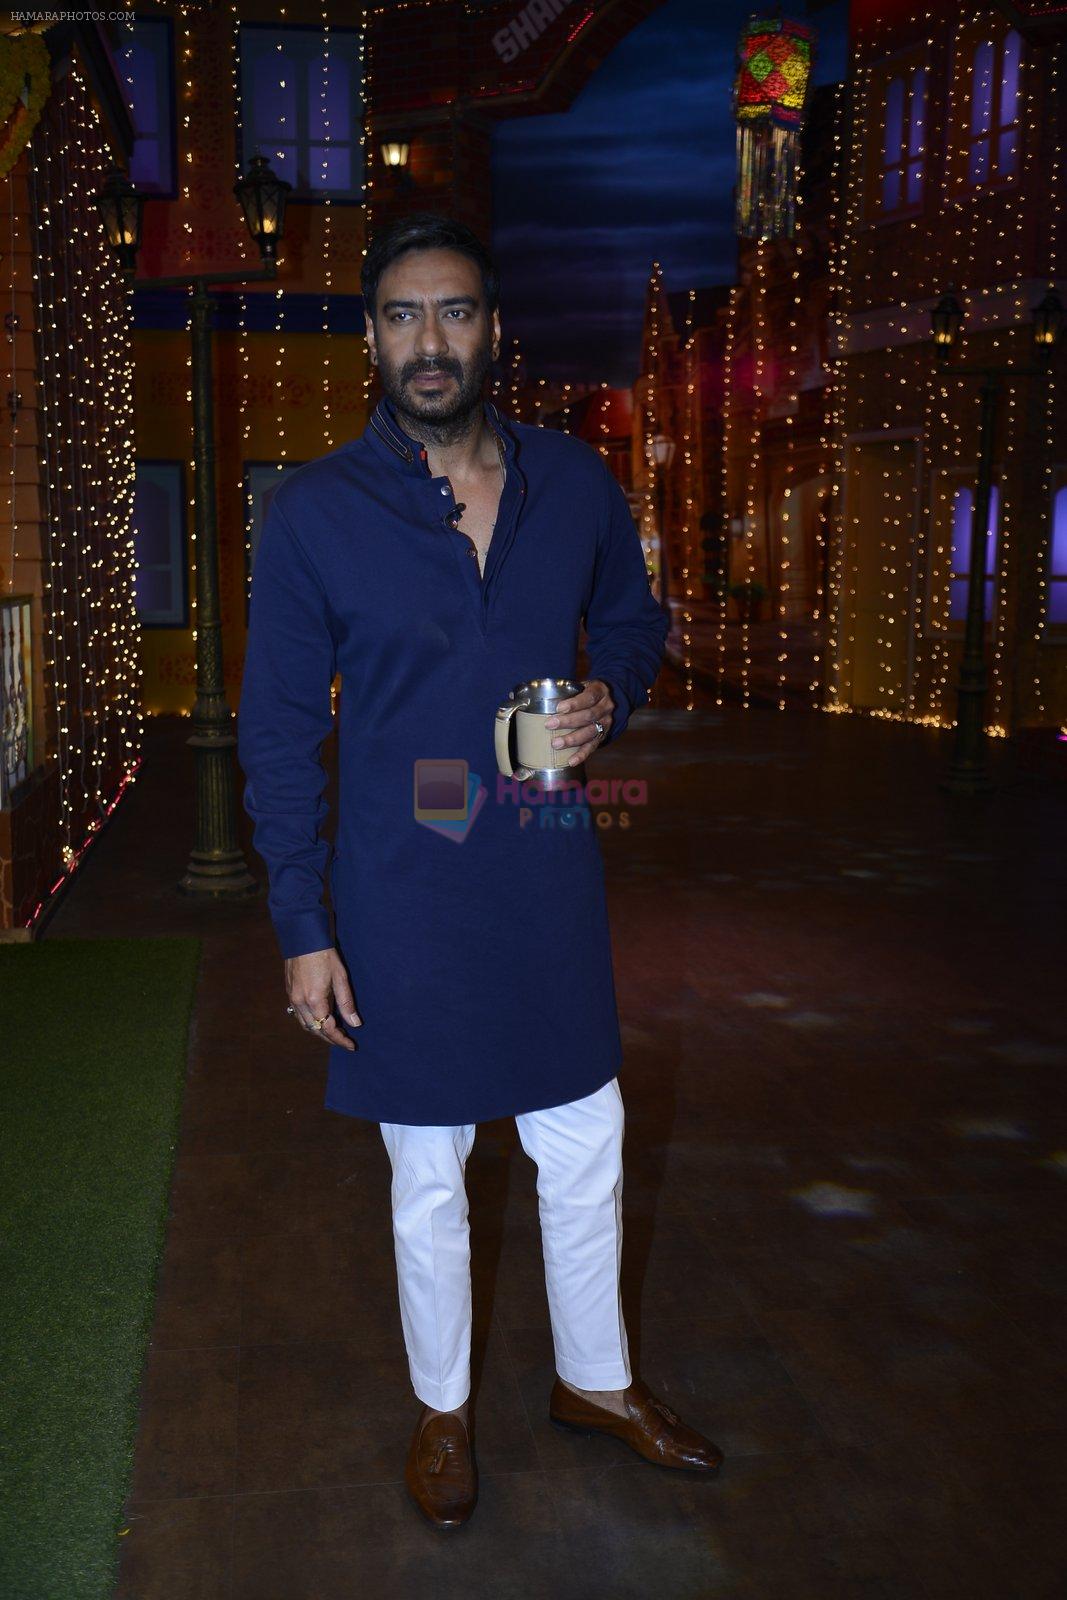 Ajay Devgan promote Shivaay on the sets of The Kapil Sharma Show on 22nd Oct 2016